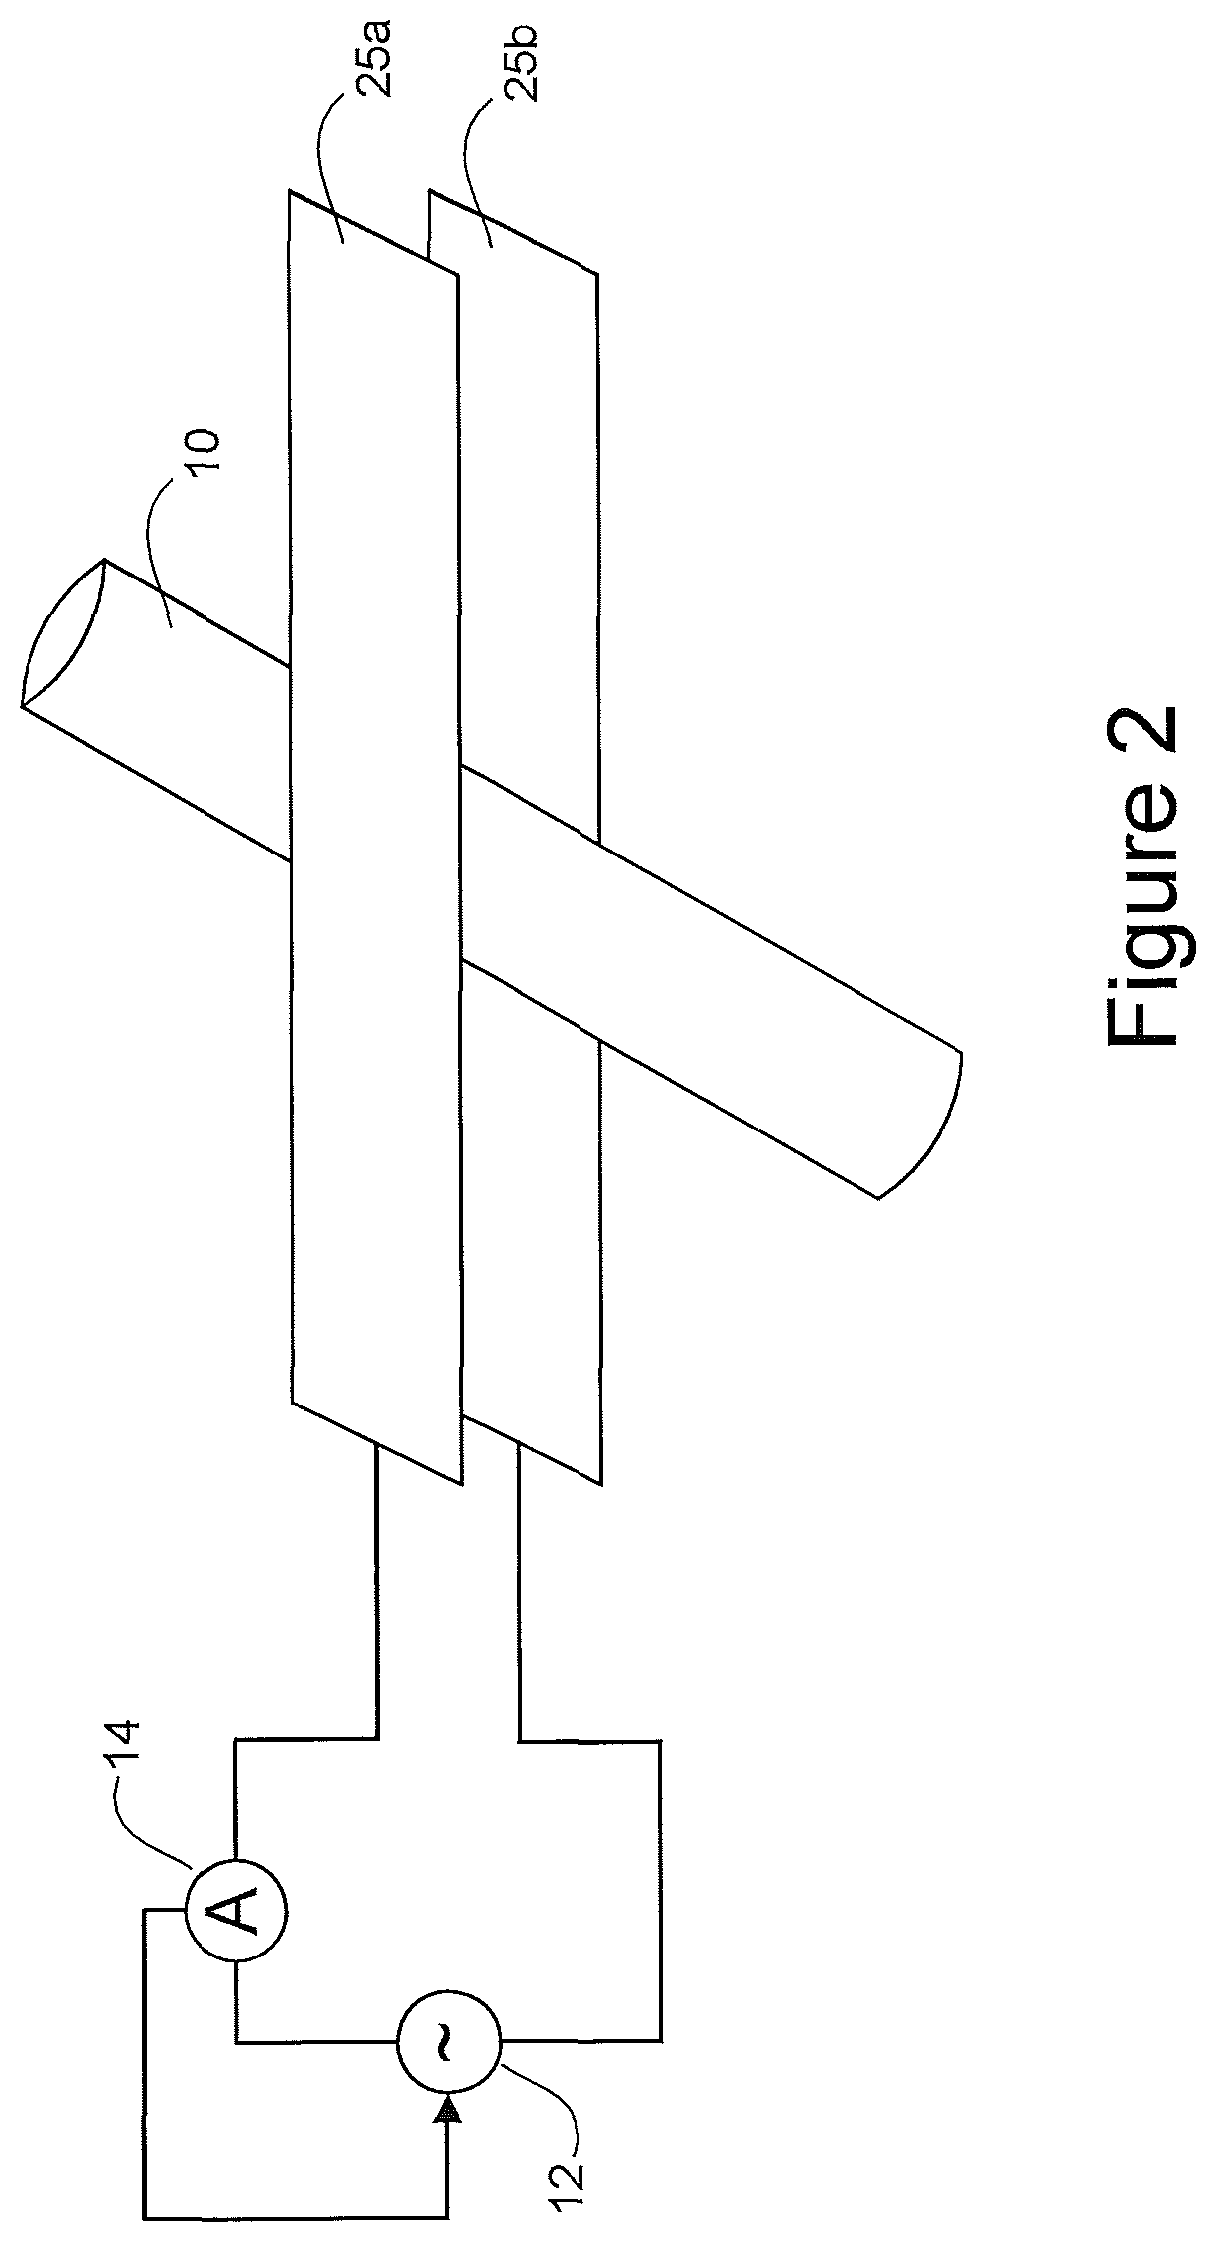 Method and apparatus for manipulating the shape of hair